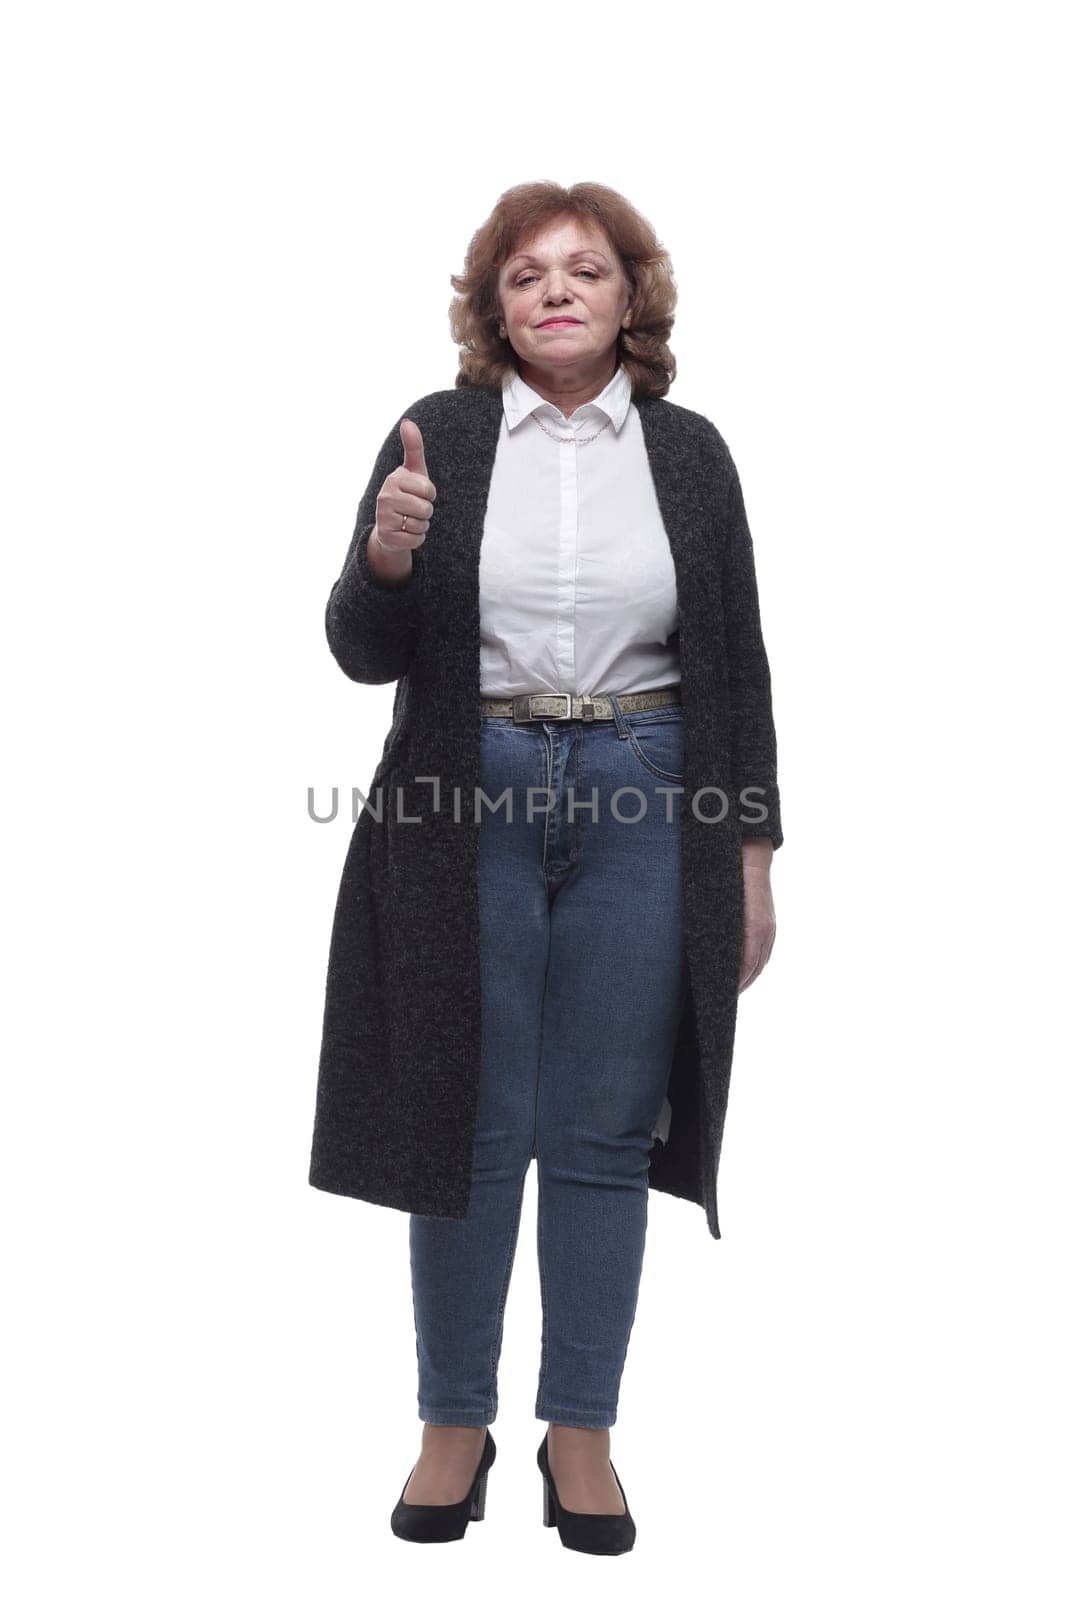 in full growth. modern mature woman looking at you. isolated on a white background